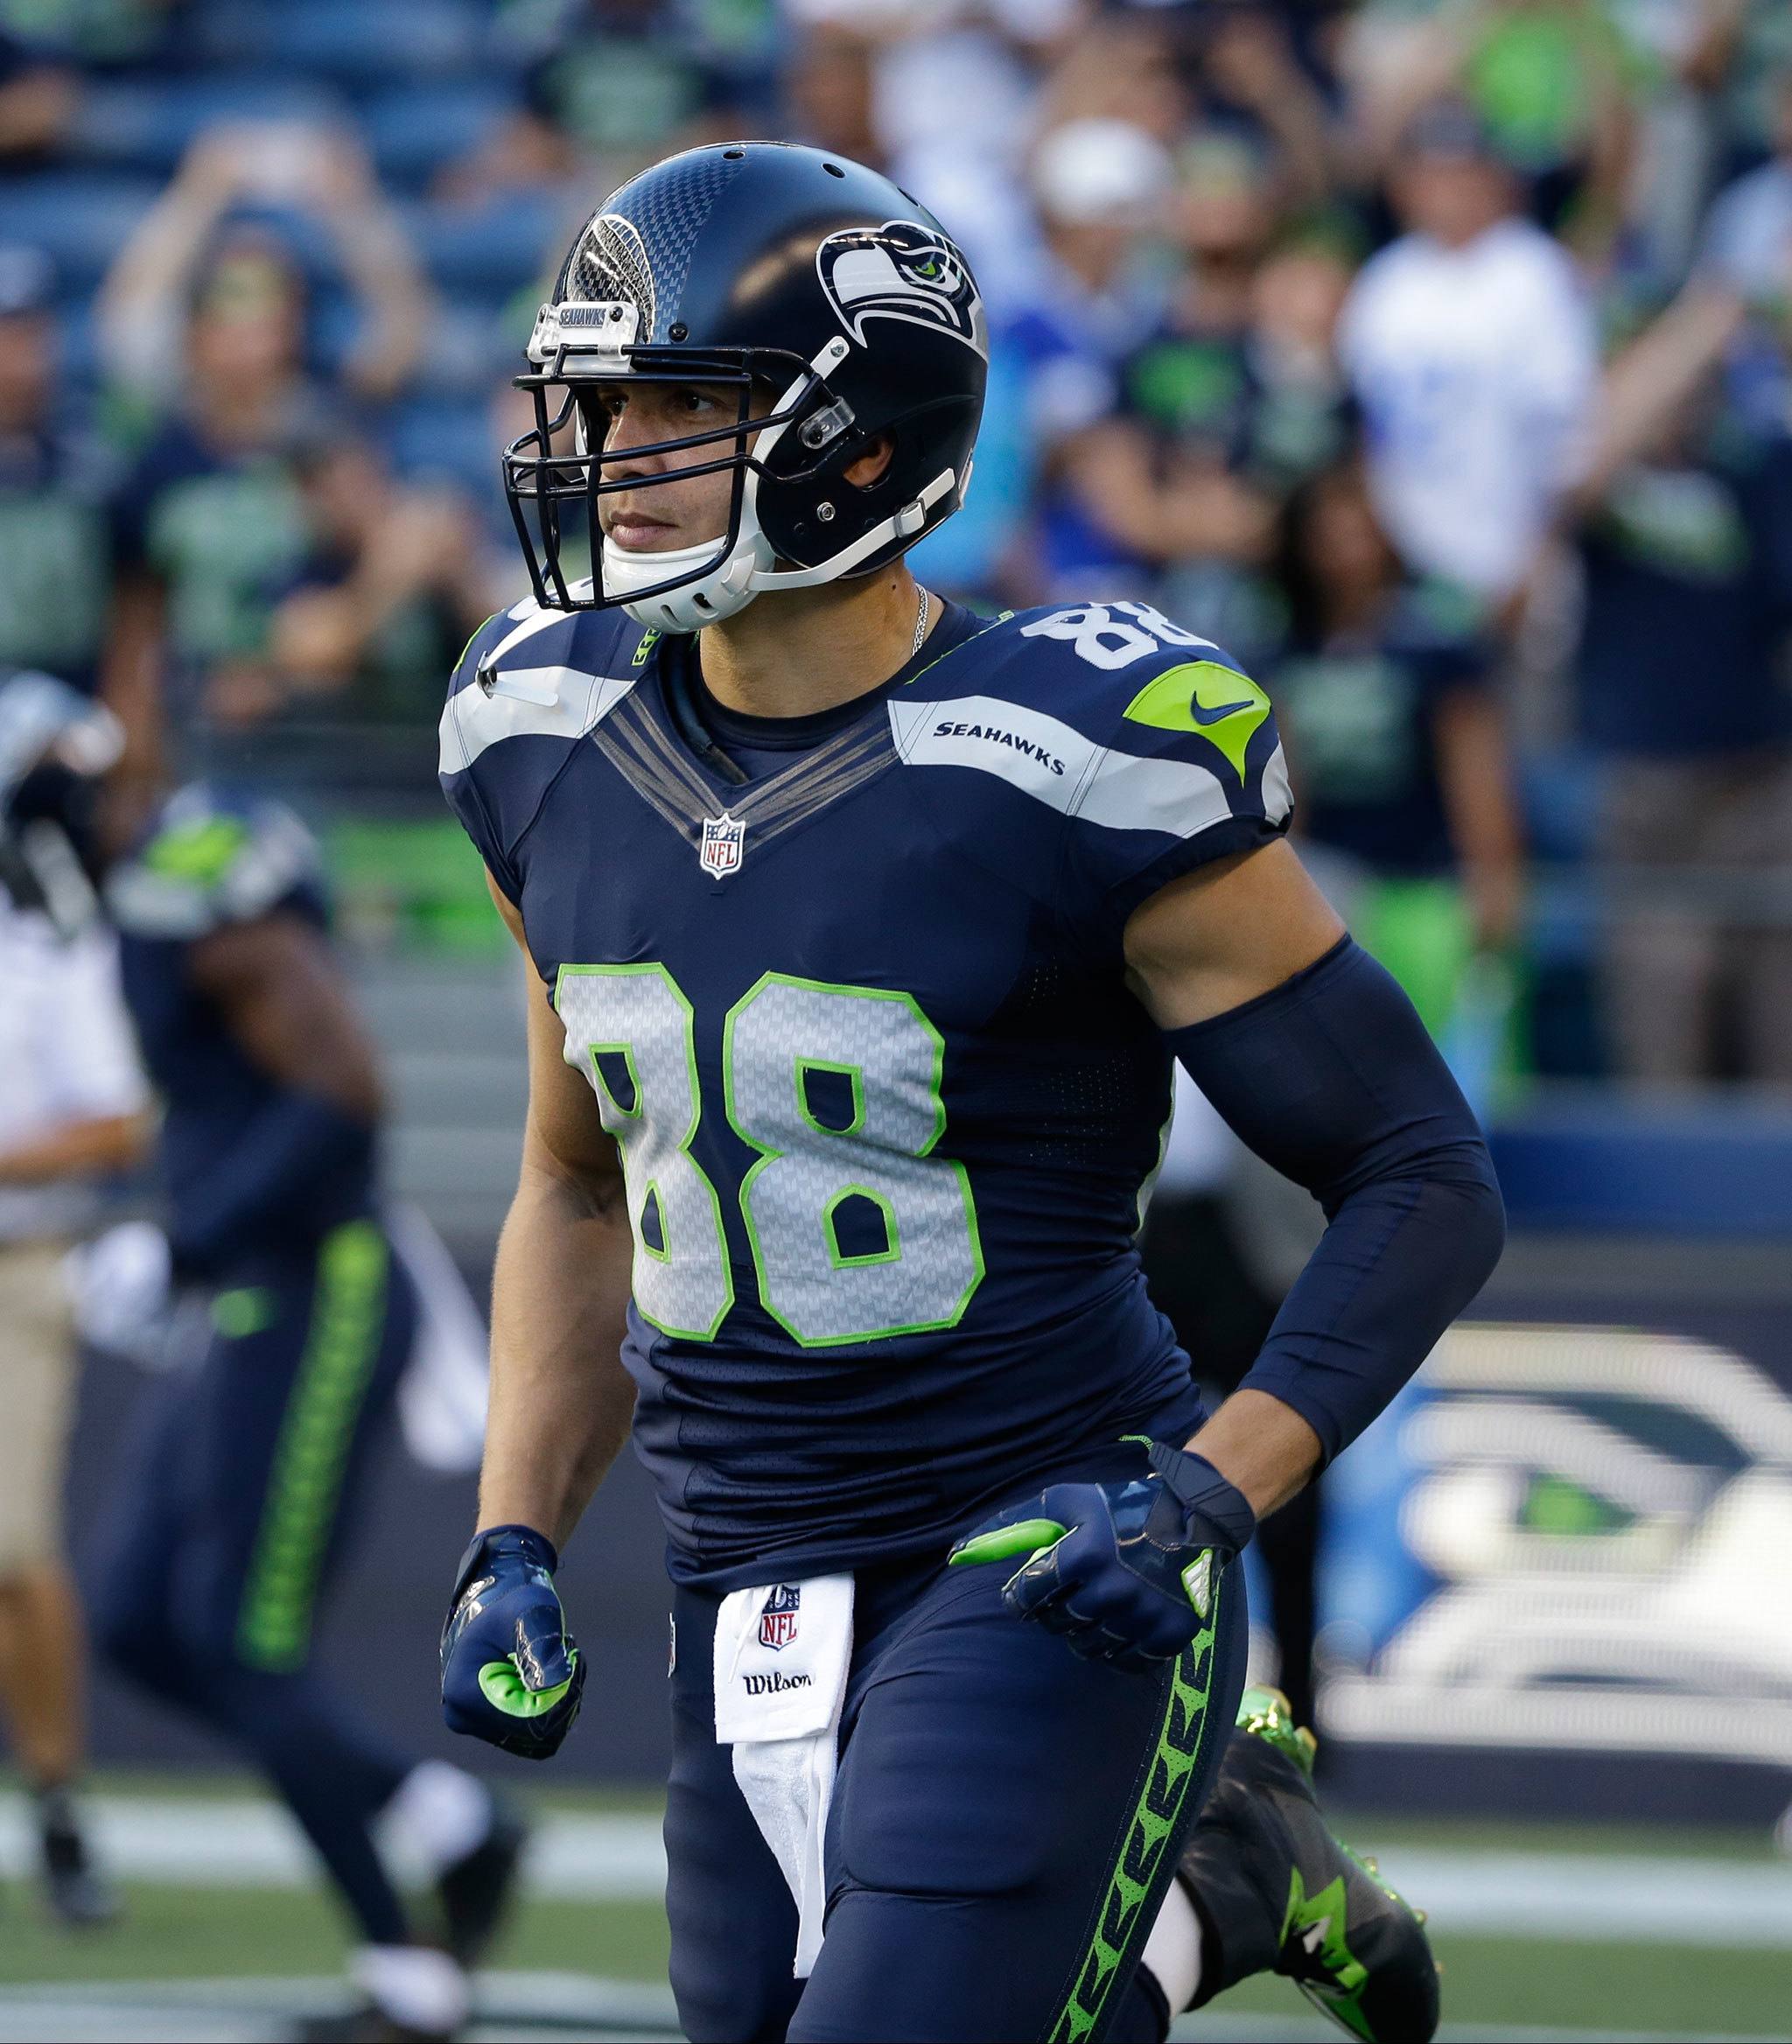 Seahawks tight end Jimmy Graham runs on the field during warmups before a preseason game against the Cowboys on Thursday in Seattle. (AP Photo/Elaine Thompson)